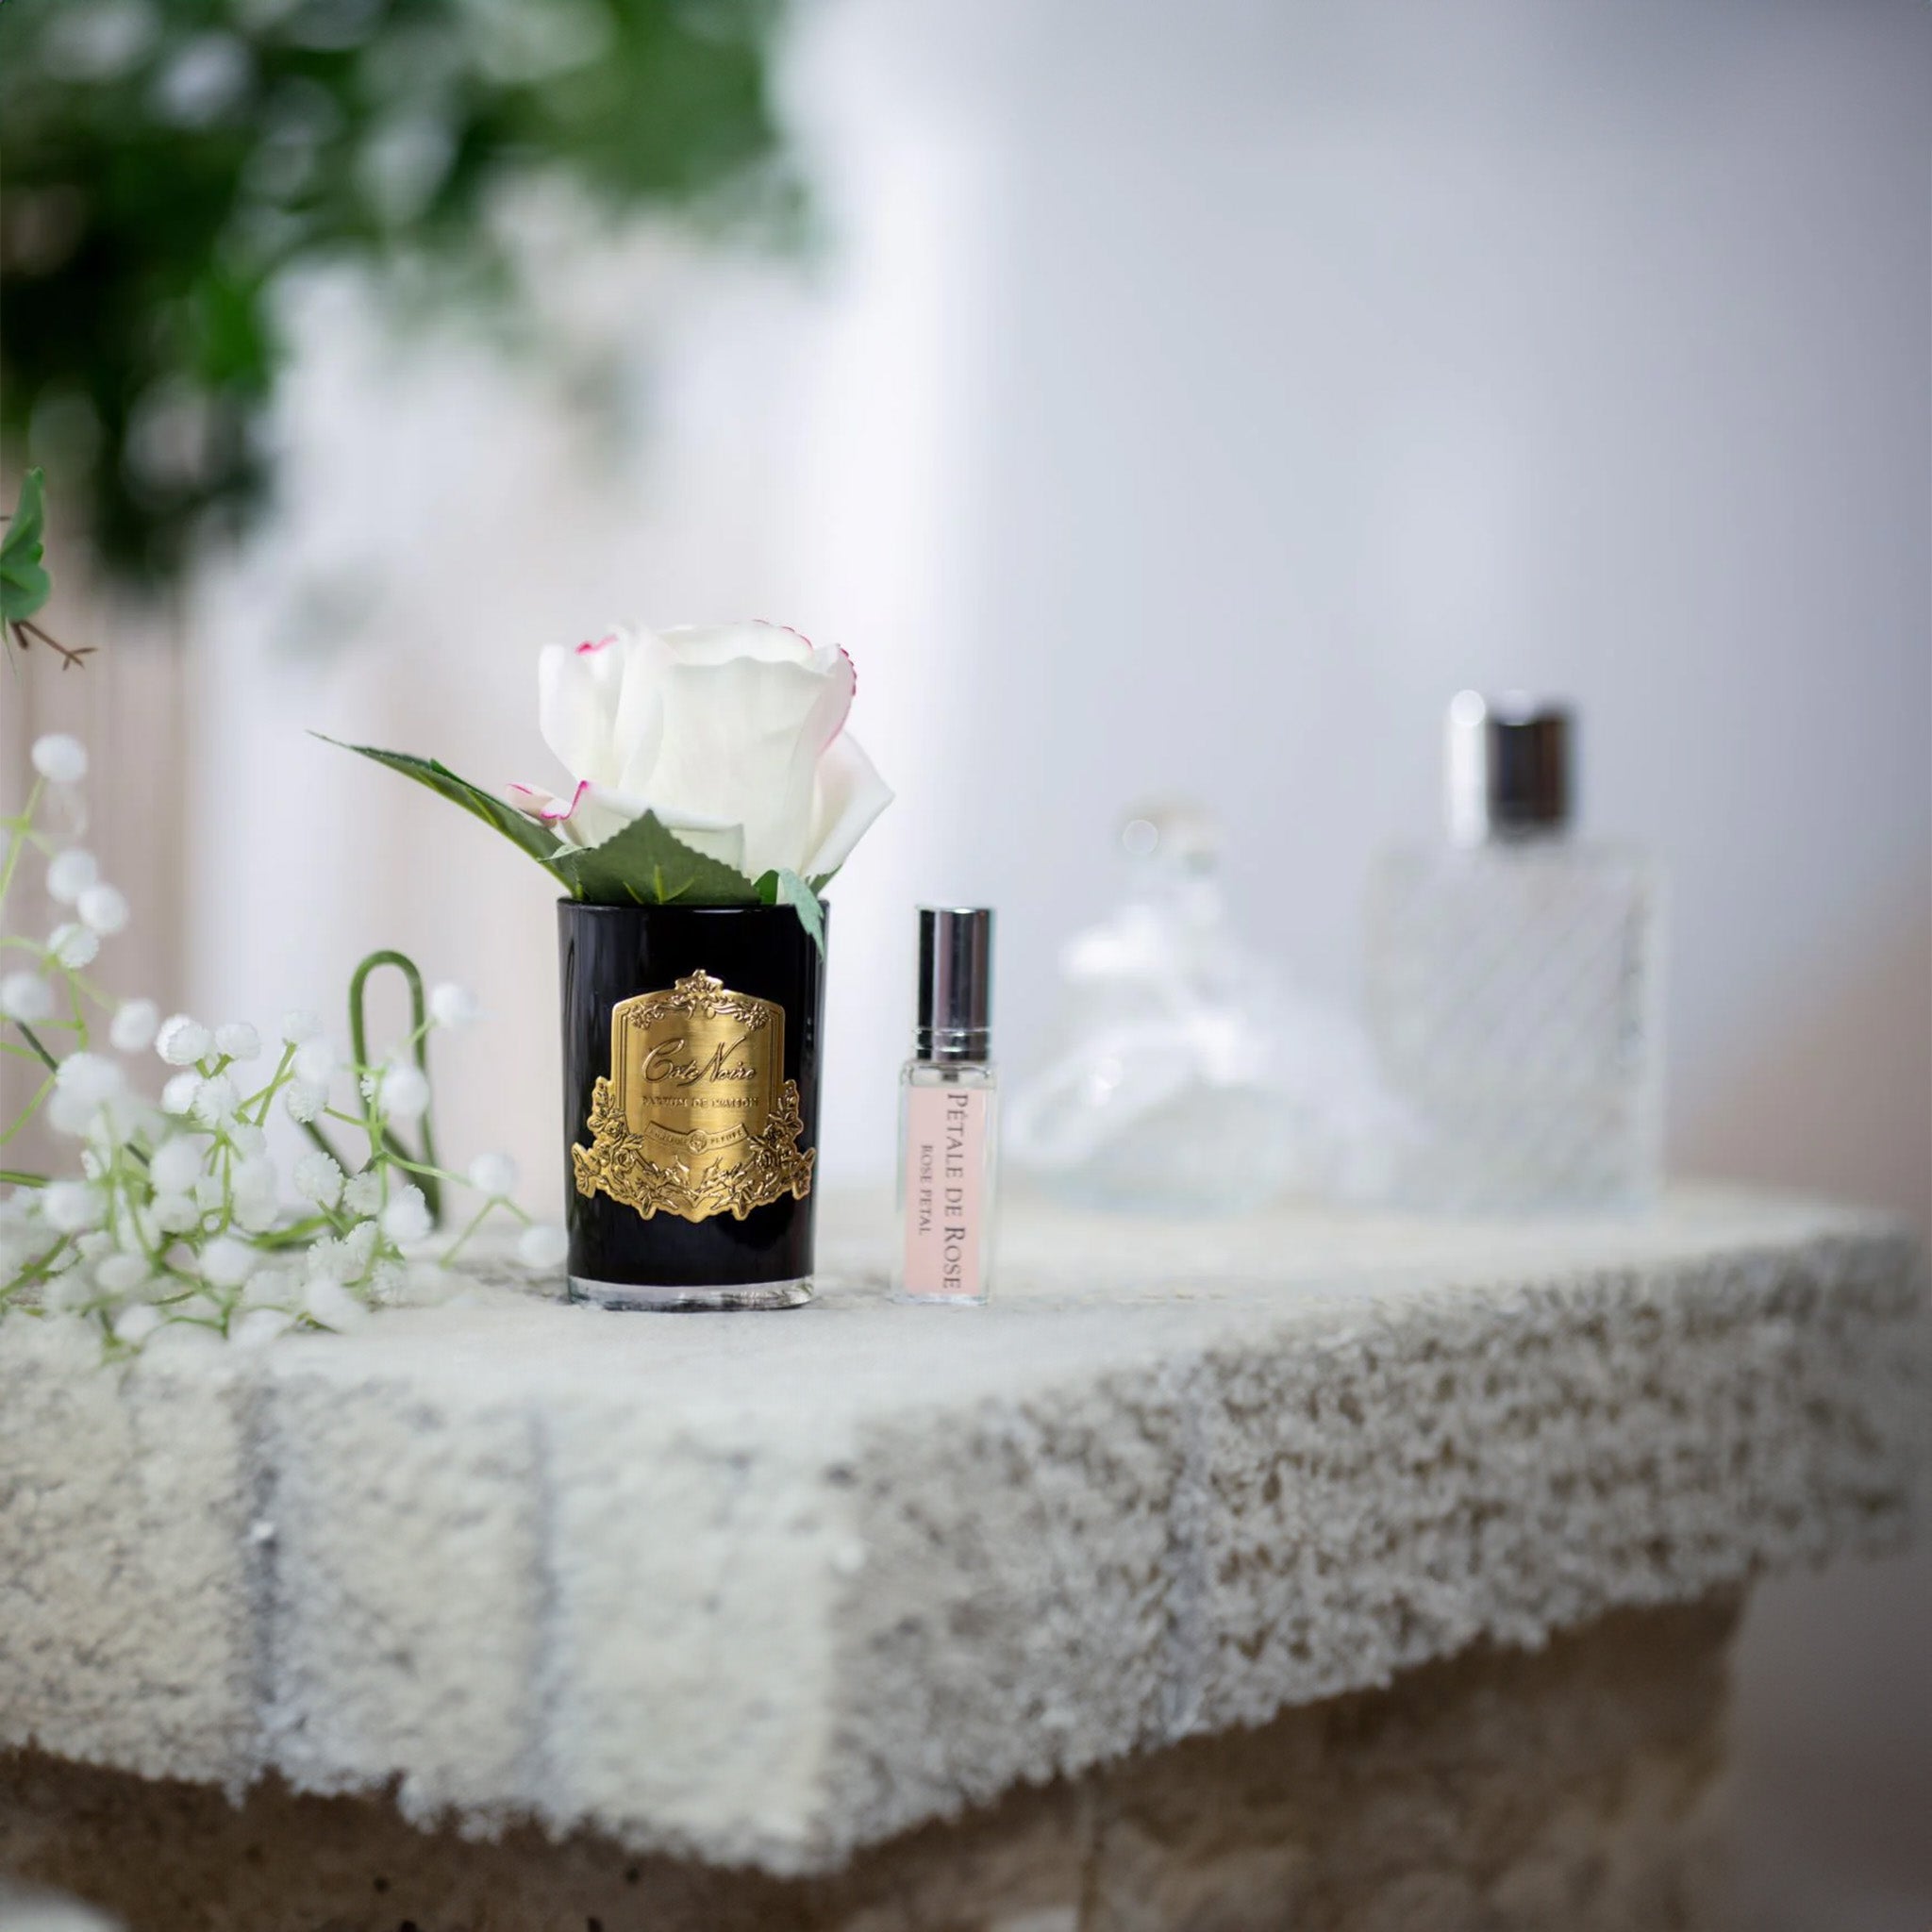 a stone table with a black vase of a blush pink rose and a bottle of fragrance by cote noire